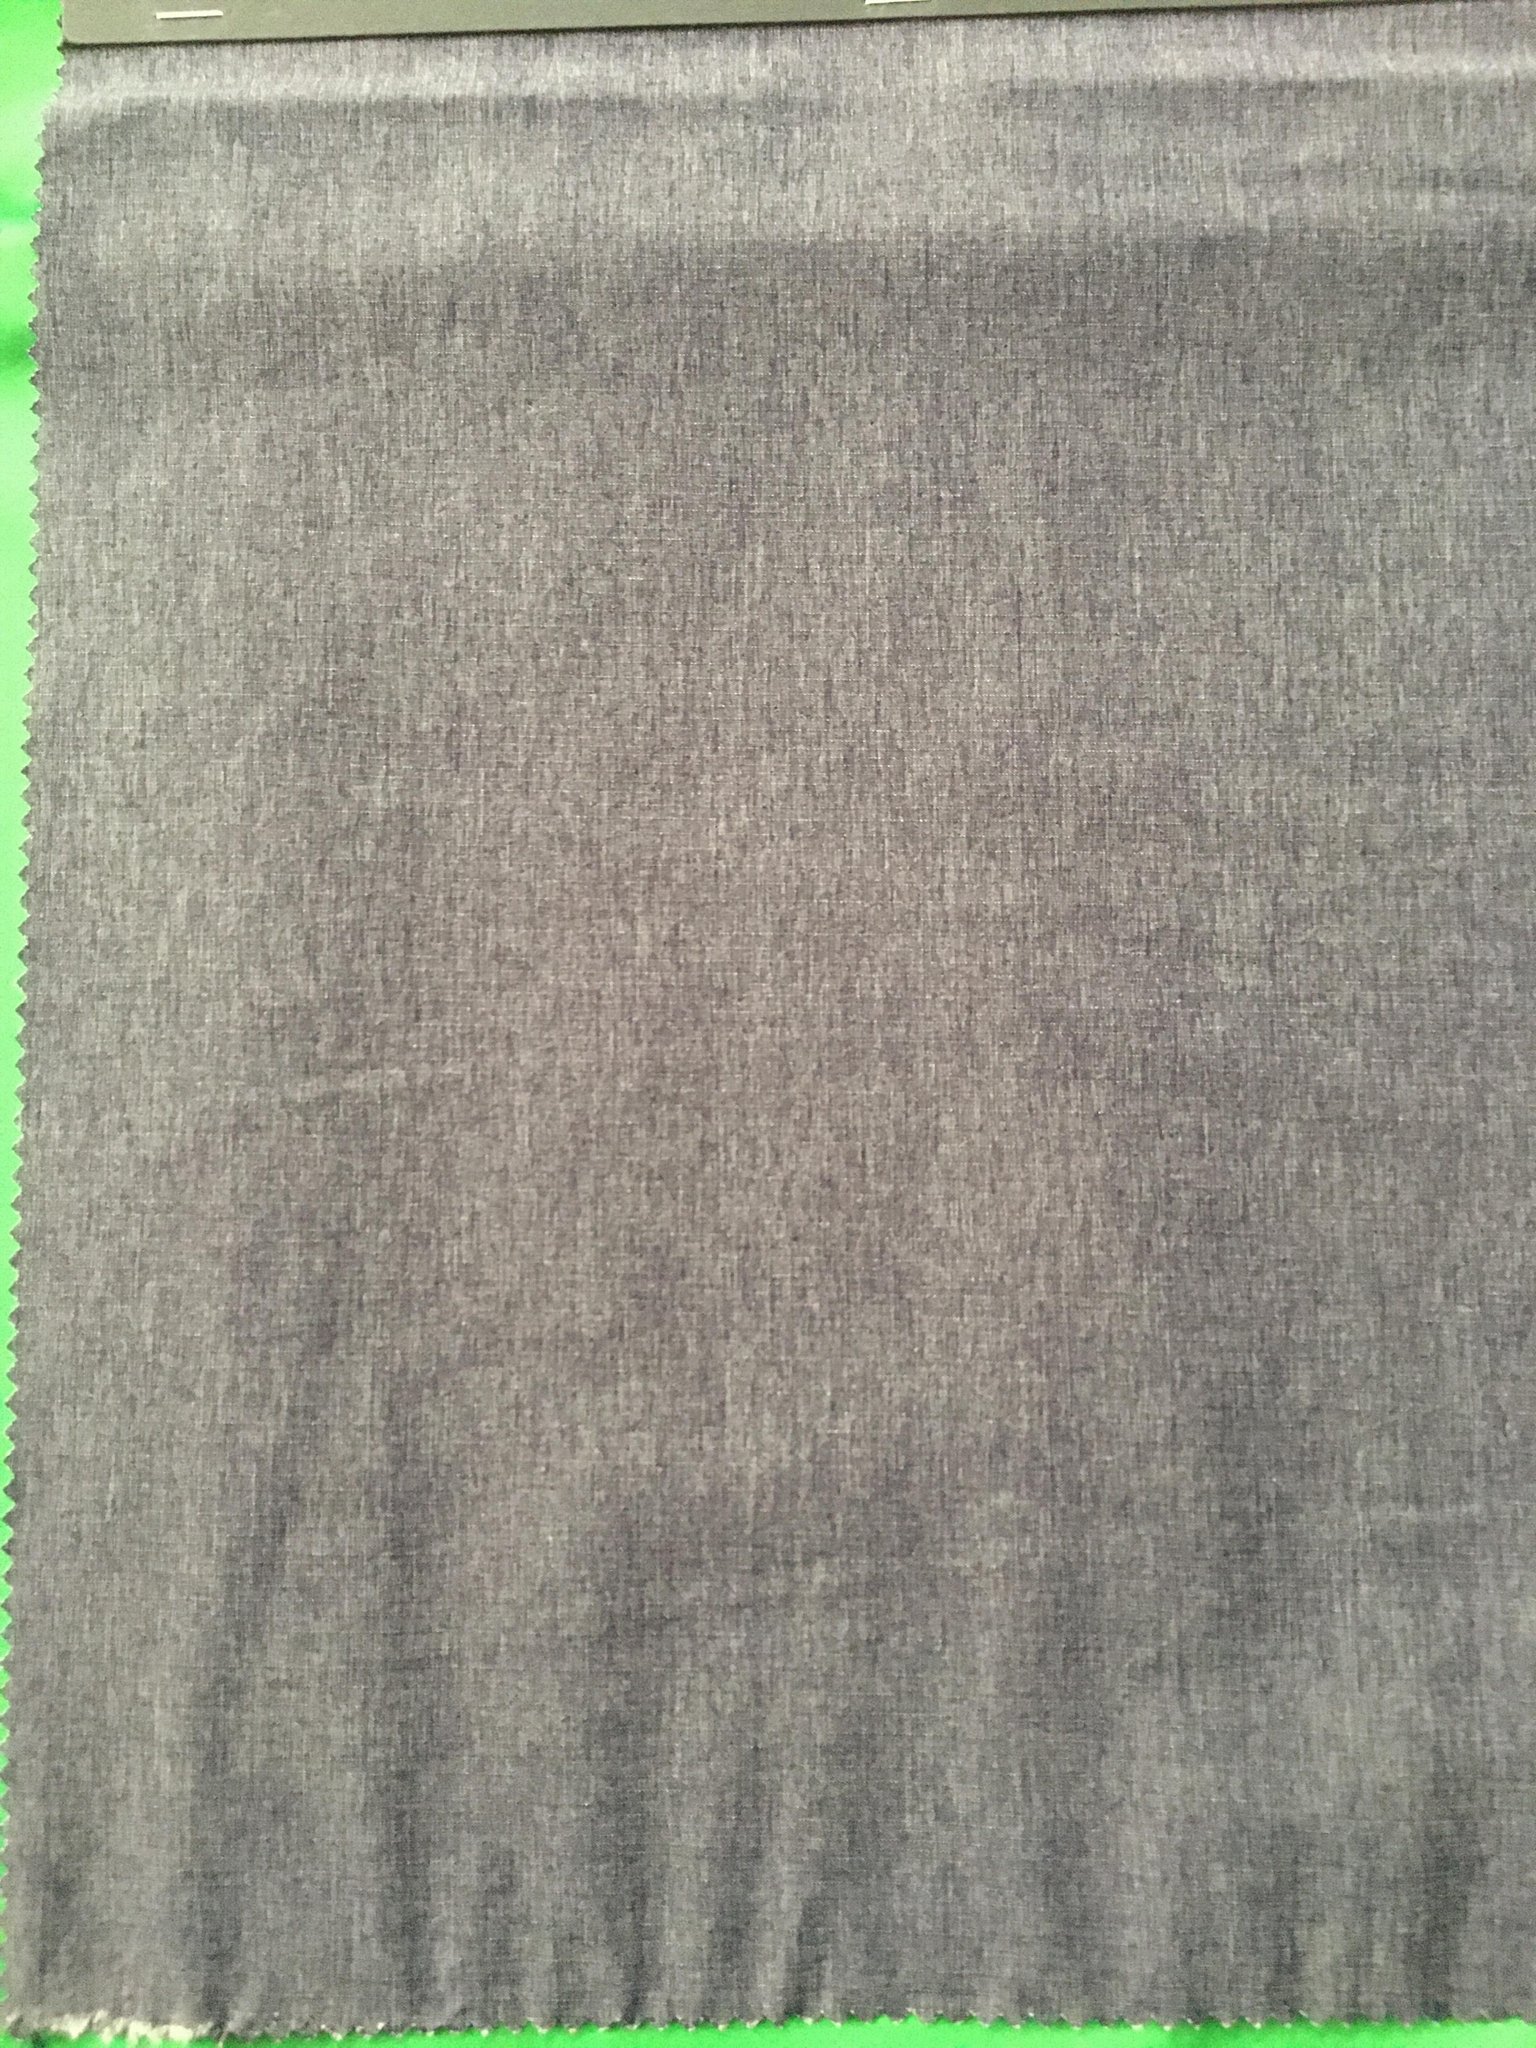 Dual color cationic knitted fabric 3